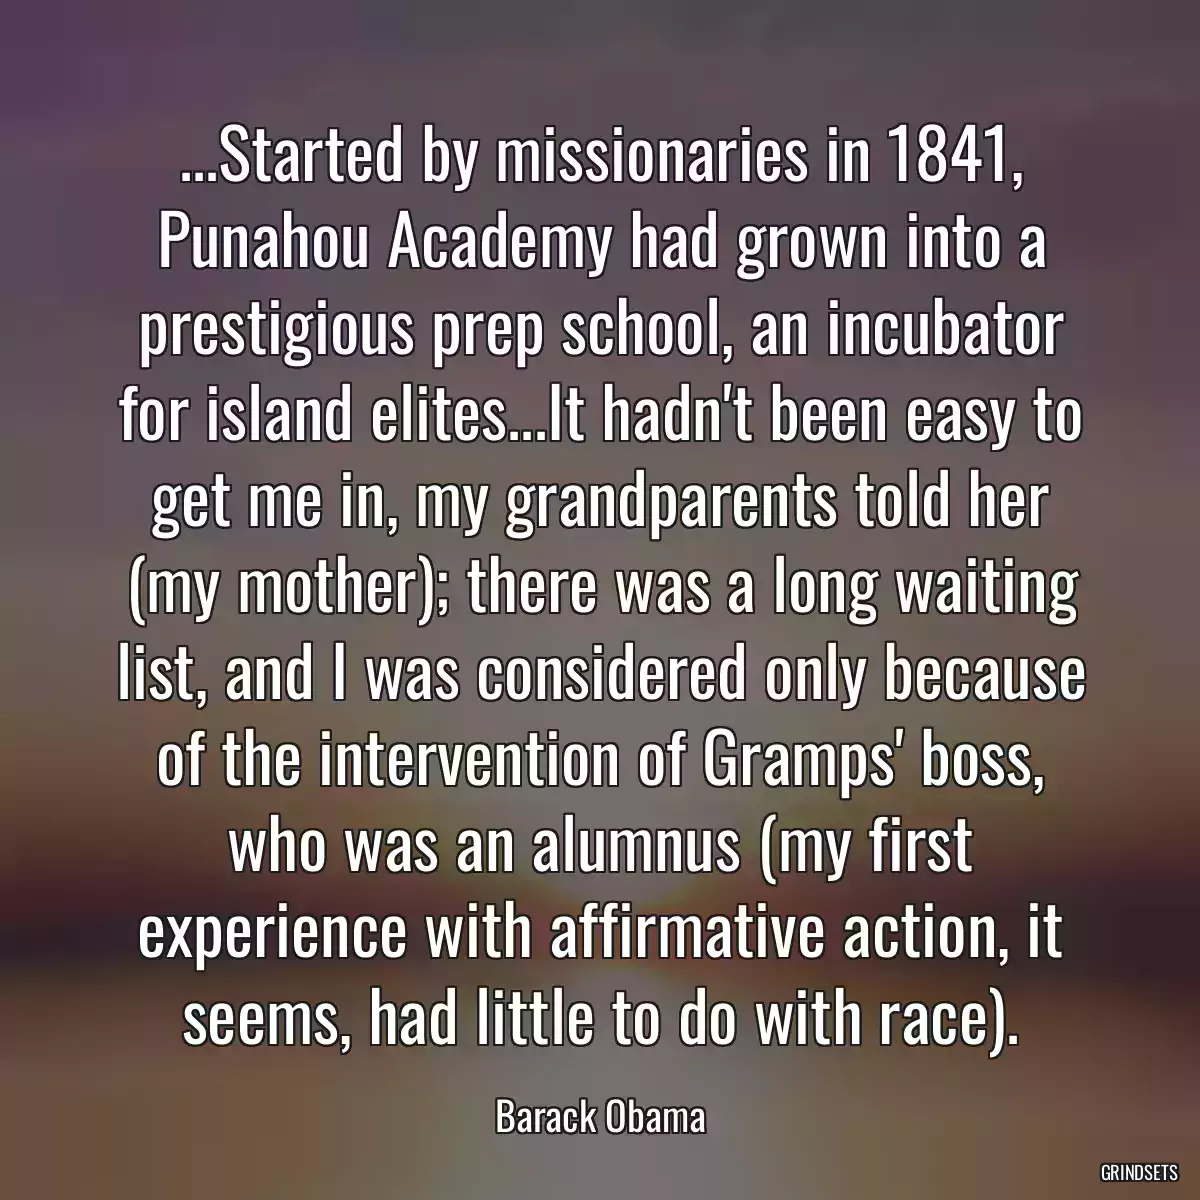 ...Started by missionaries in 1841, Punahou Academy had grown into a prestigious prep school, an incubator for island elites...It hadn\'t been easy to get me in, my grandparents told her (my mother); there was a long waiting list, and I was considered only because of the intervention of Gramps\' boss, who was an alumnus (my first experience with affirmative action, it seems, had little to do with race).